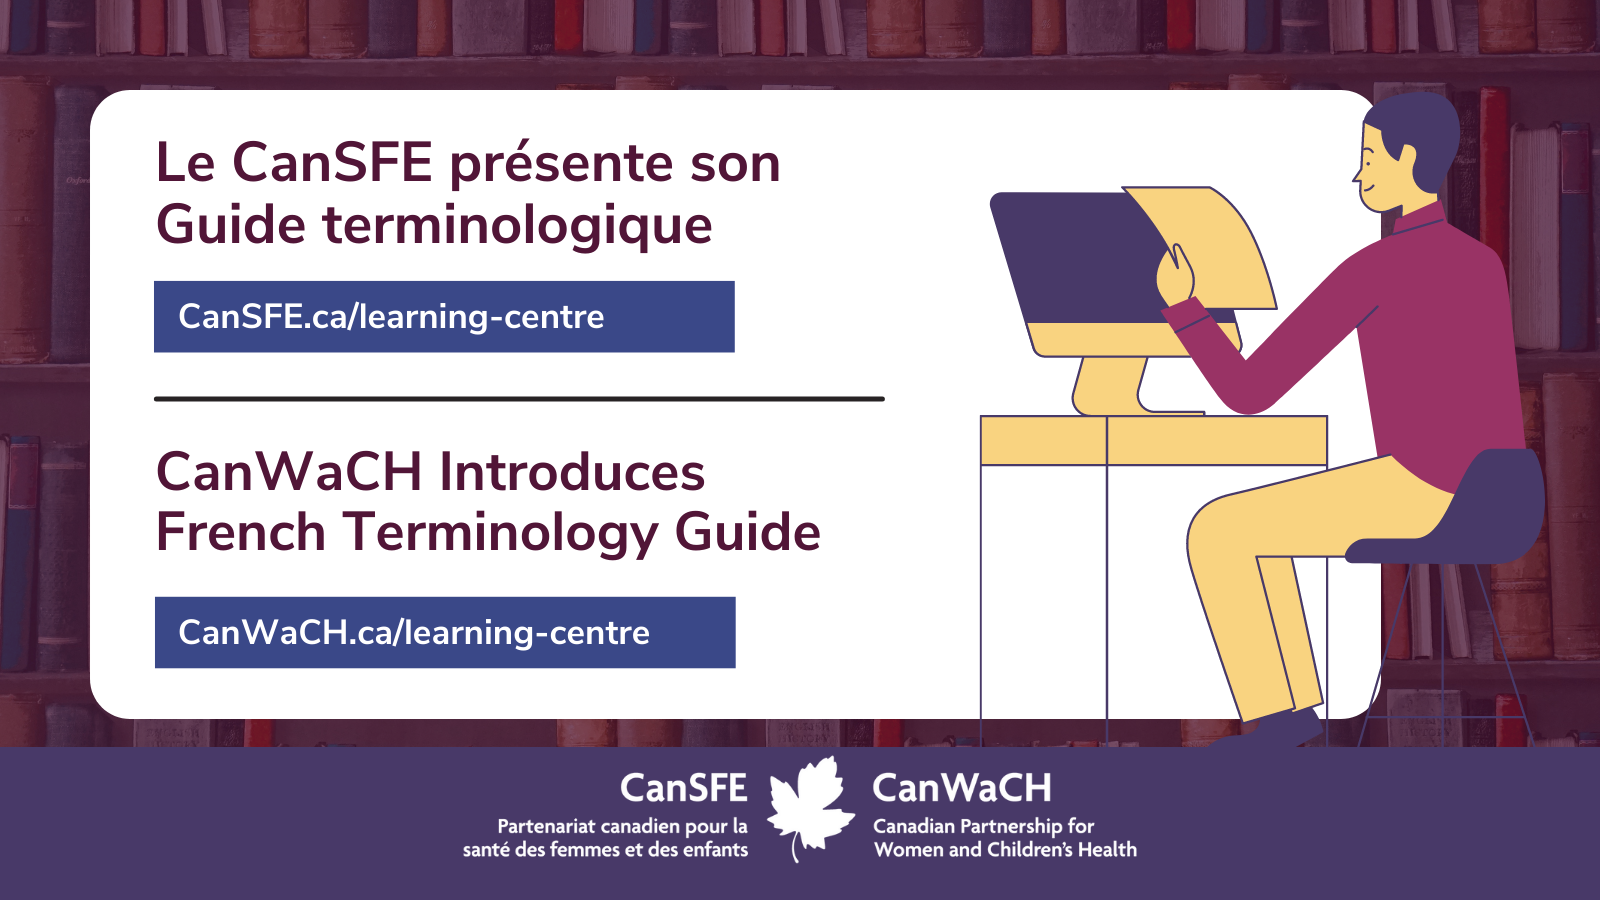 Introducing our French Terminology Guide on the Use of Technical Terms in Gender Equality